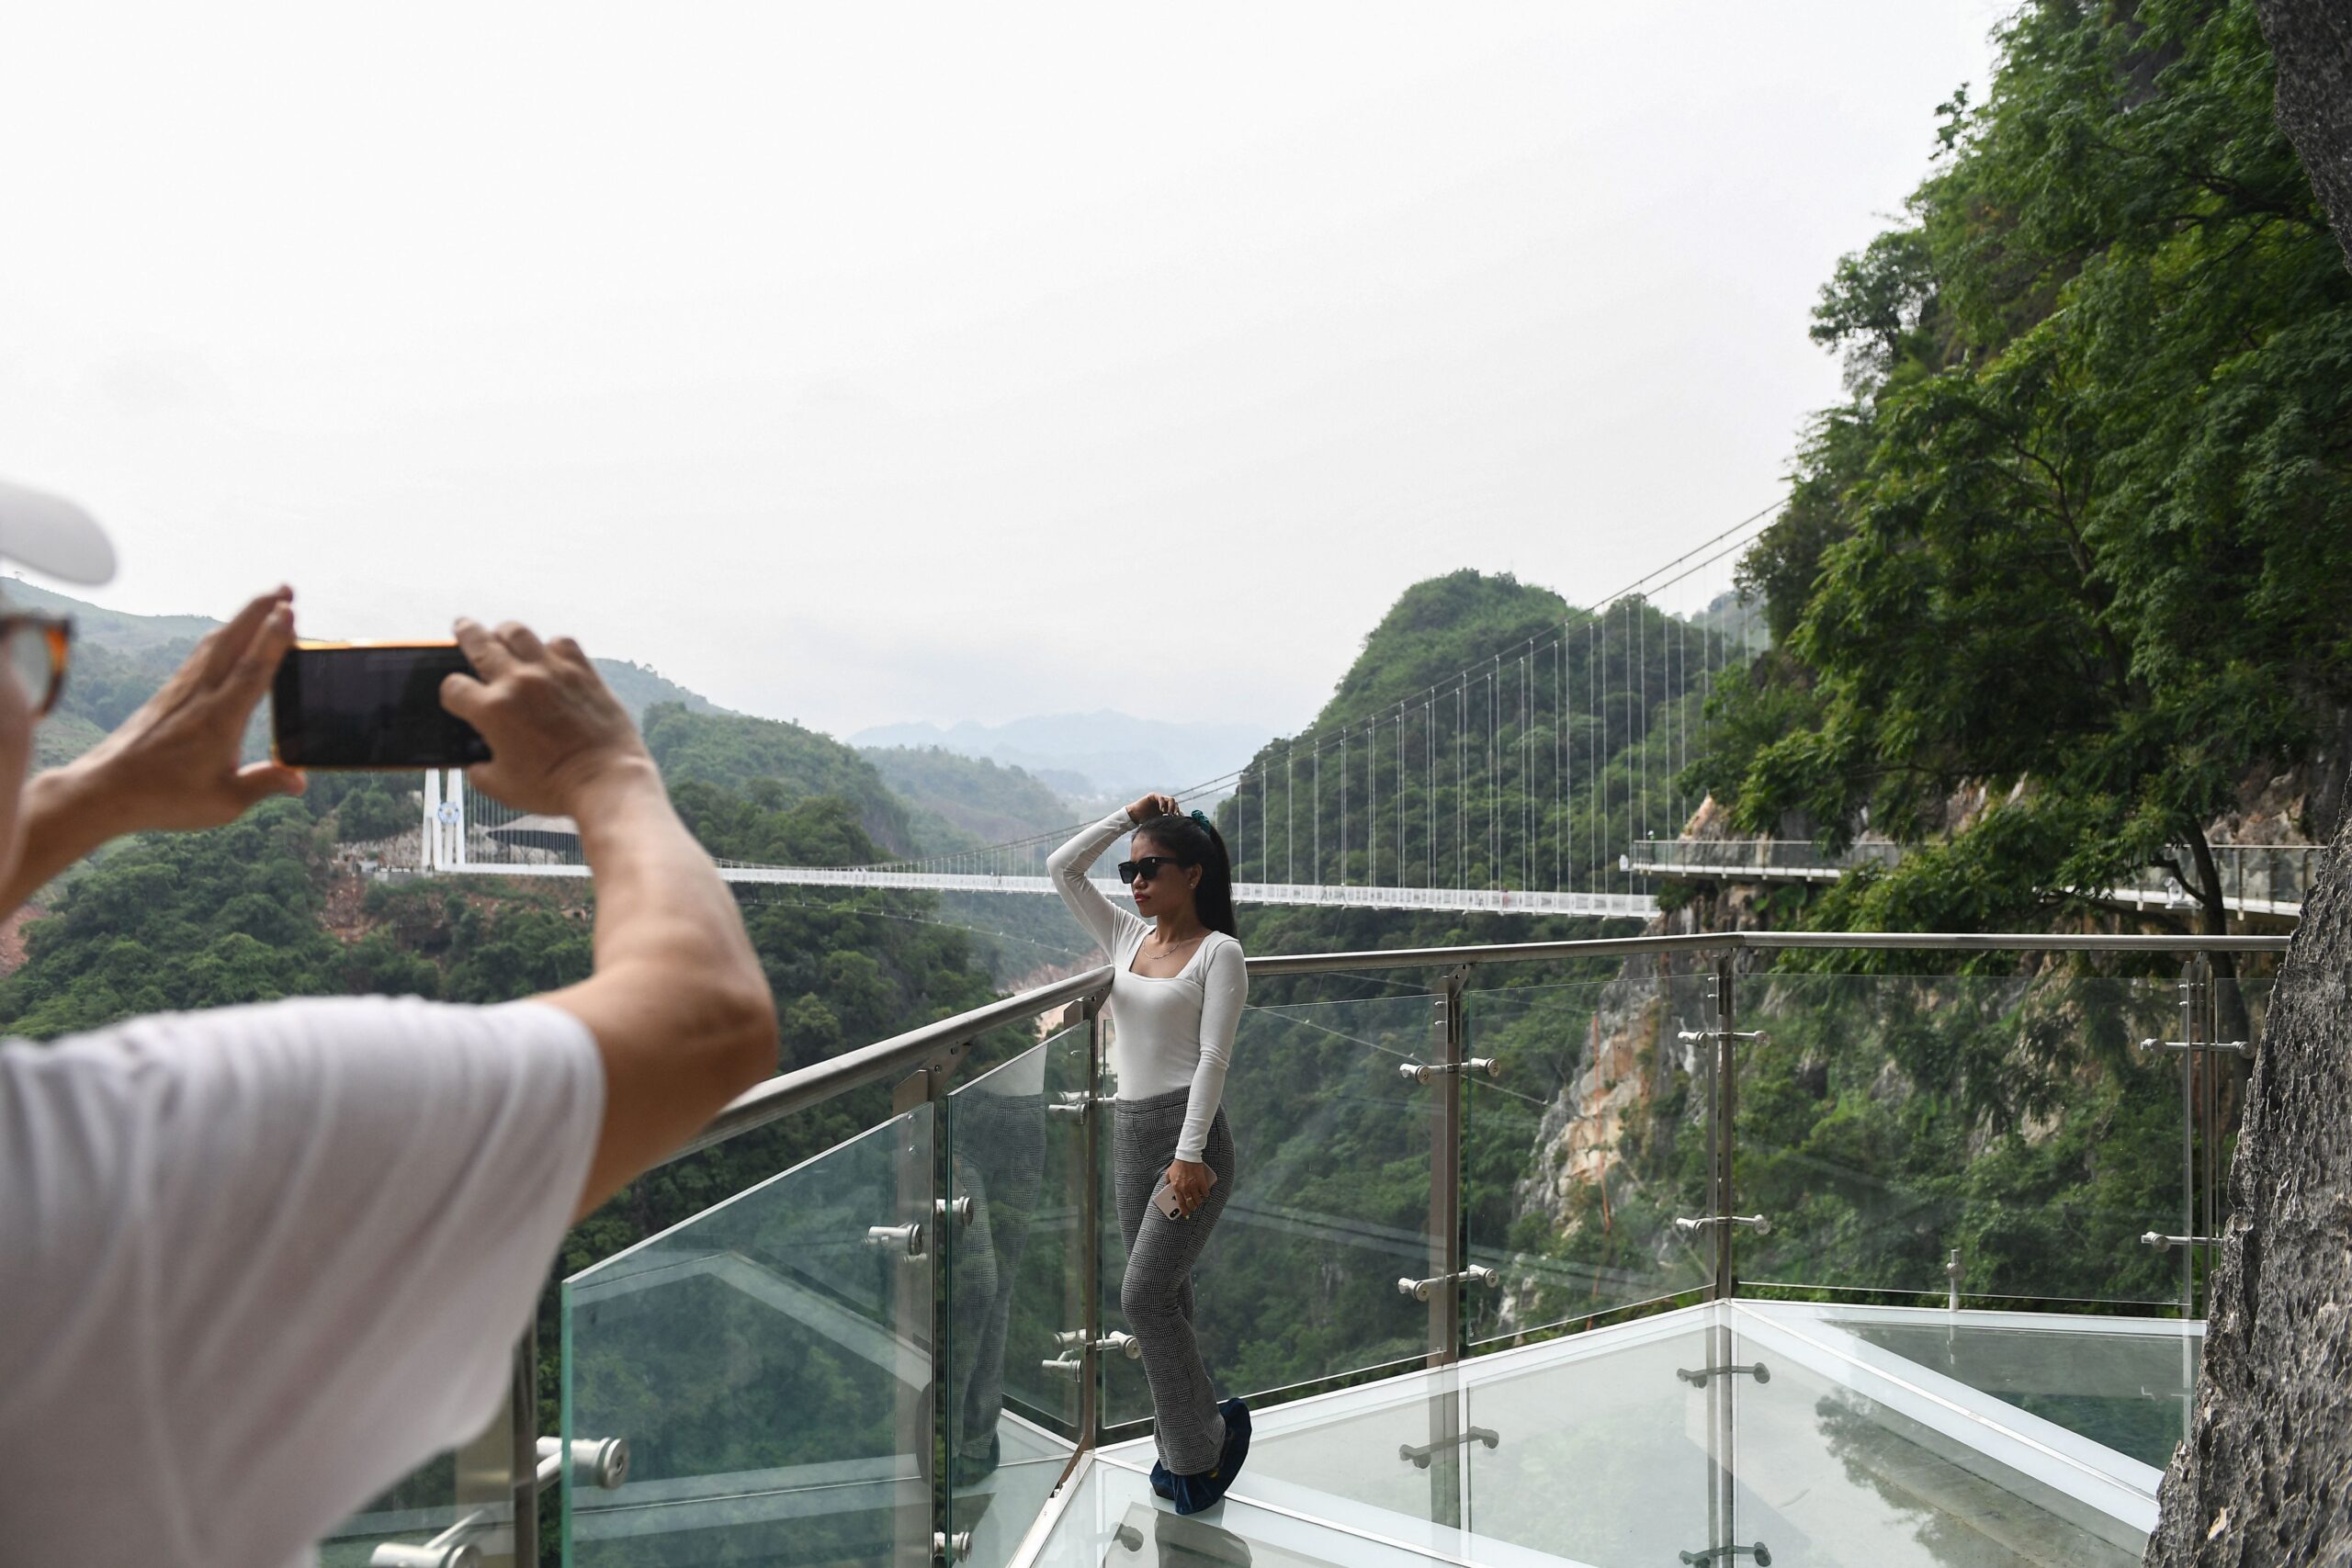 people take pictures on the Bach Long glass bridge in the Moc Chau district in Vietnam&#39;s Son La province